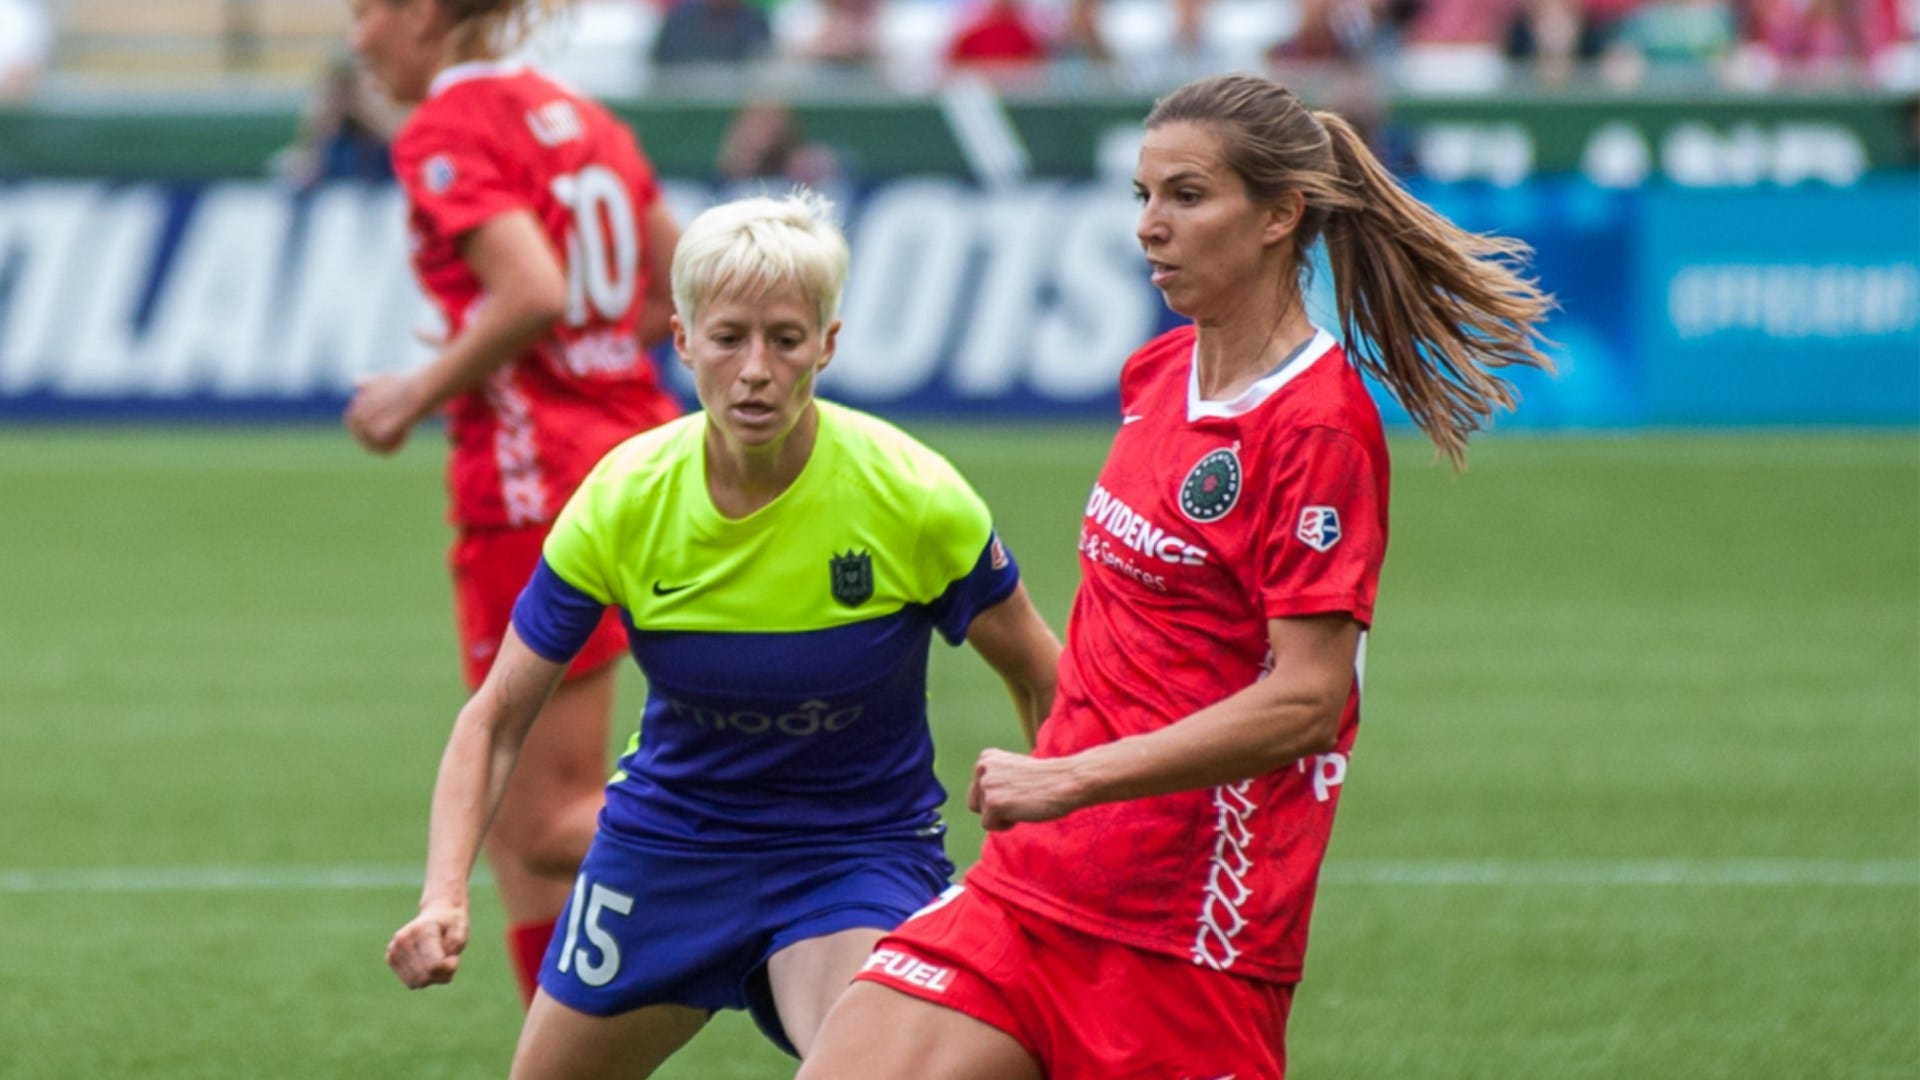 F*ck those guys!' - Inside OL Reign vs Portland Thorns, the NWSL's biggest  and best rivalry